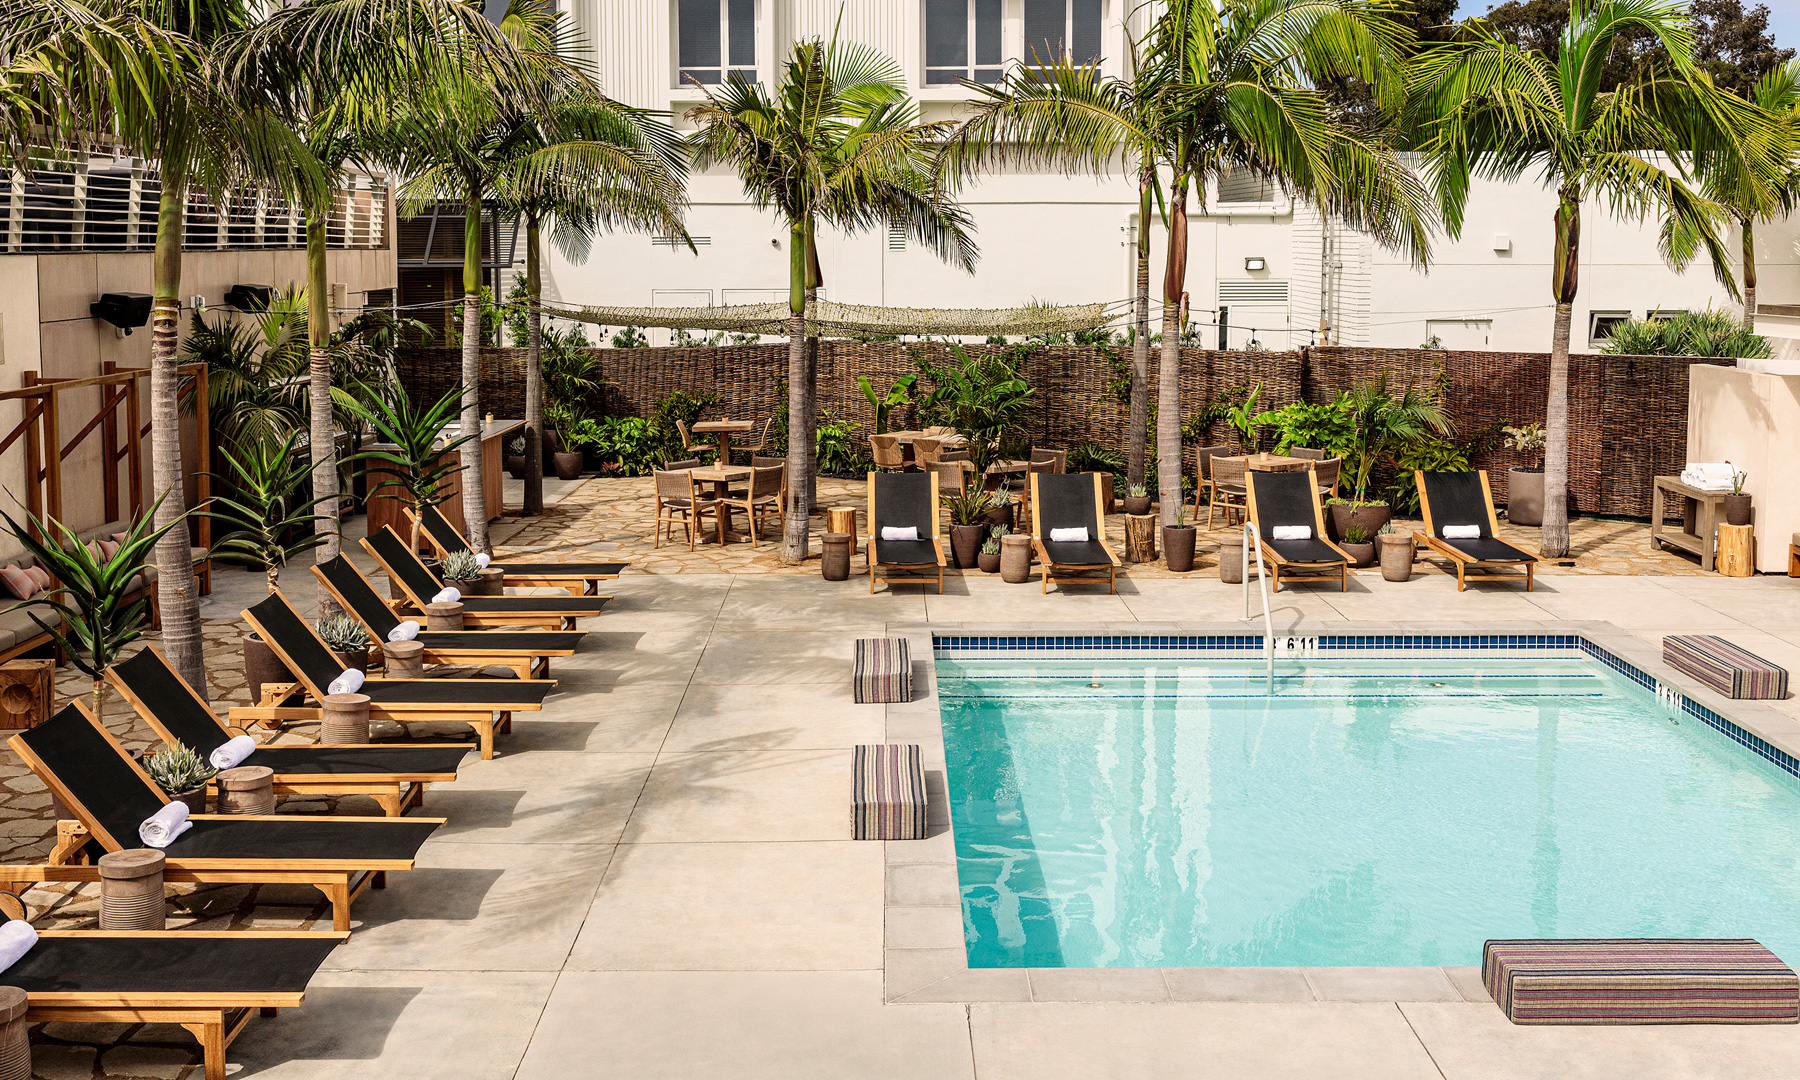 Pool surrounded by chaise lounge chairs and palm trees